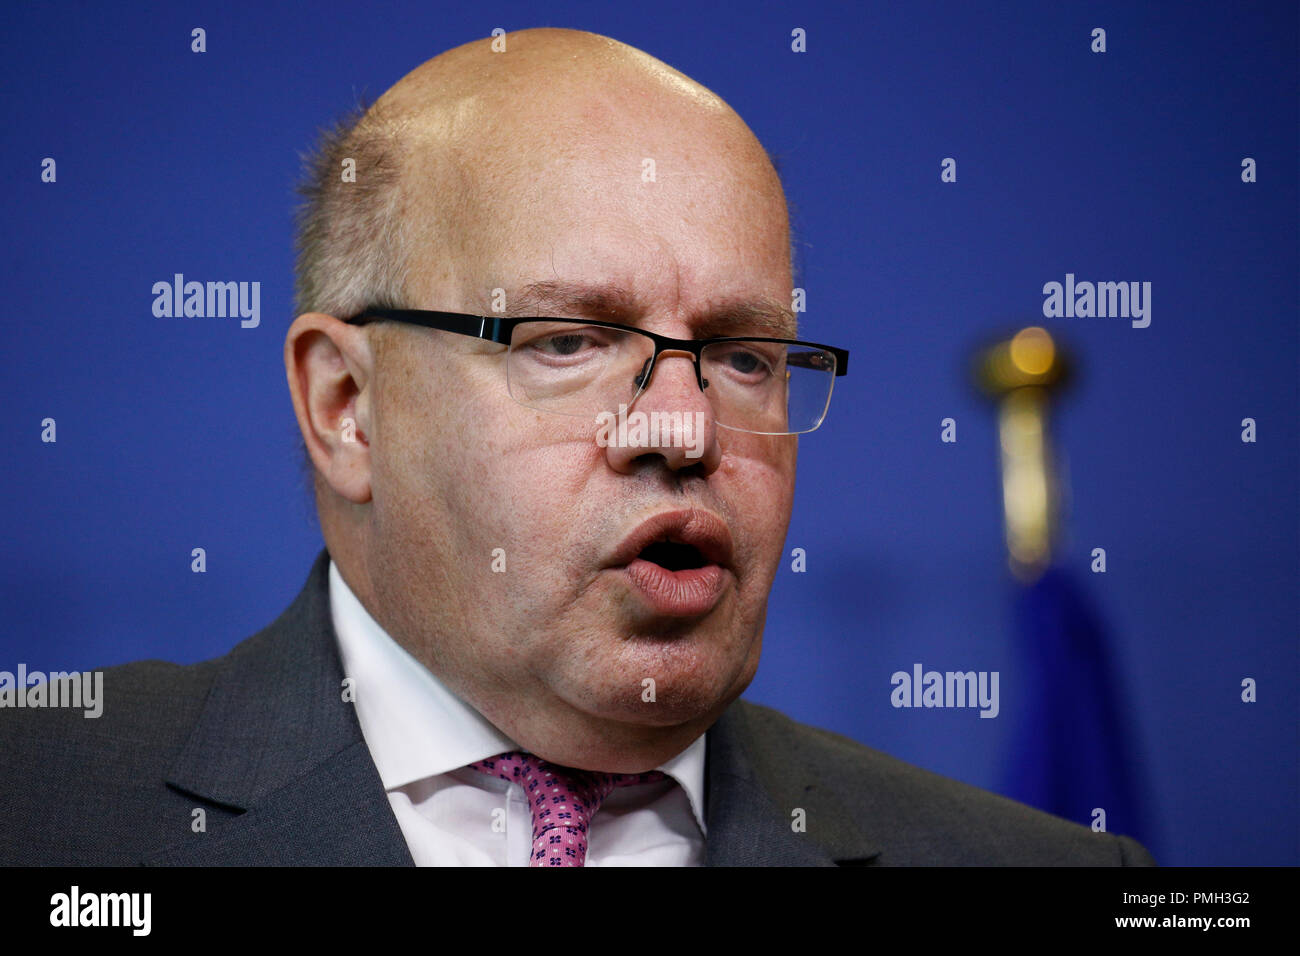 Brussels, Belgium. 18th September 2018.Vice-President of the EU Commission Maros Sefcovic and German Federal Minister of Finance, Peter Altmaier give a press briefing at the end of their meeting. Alexandros Michailidis/Alamy Live News Stock Photo